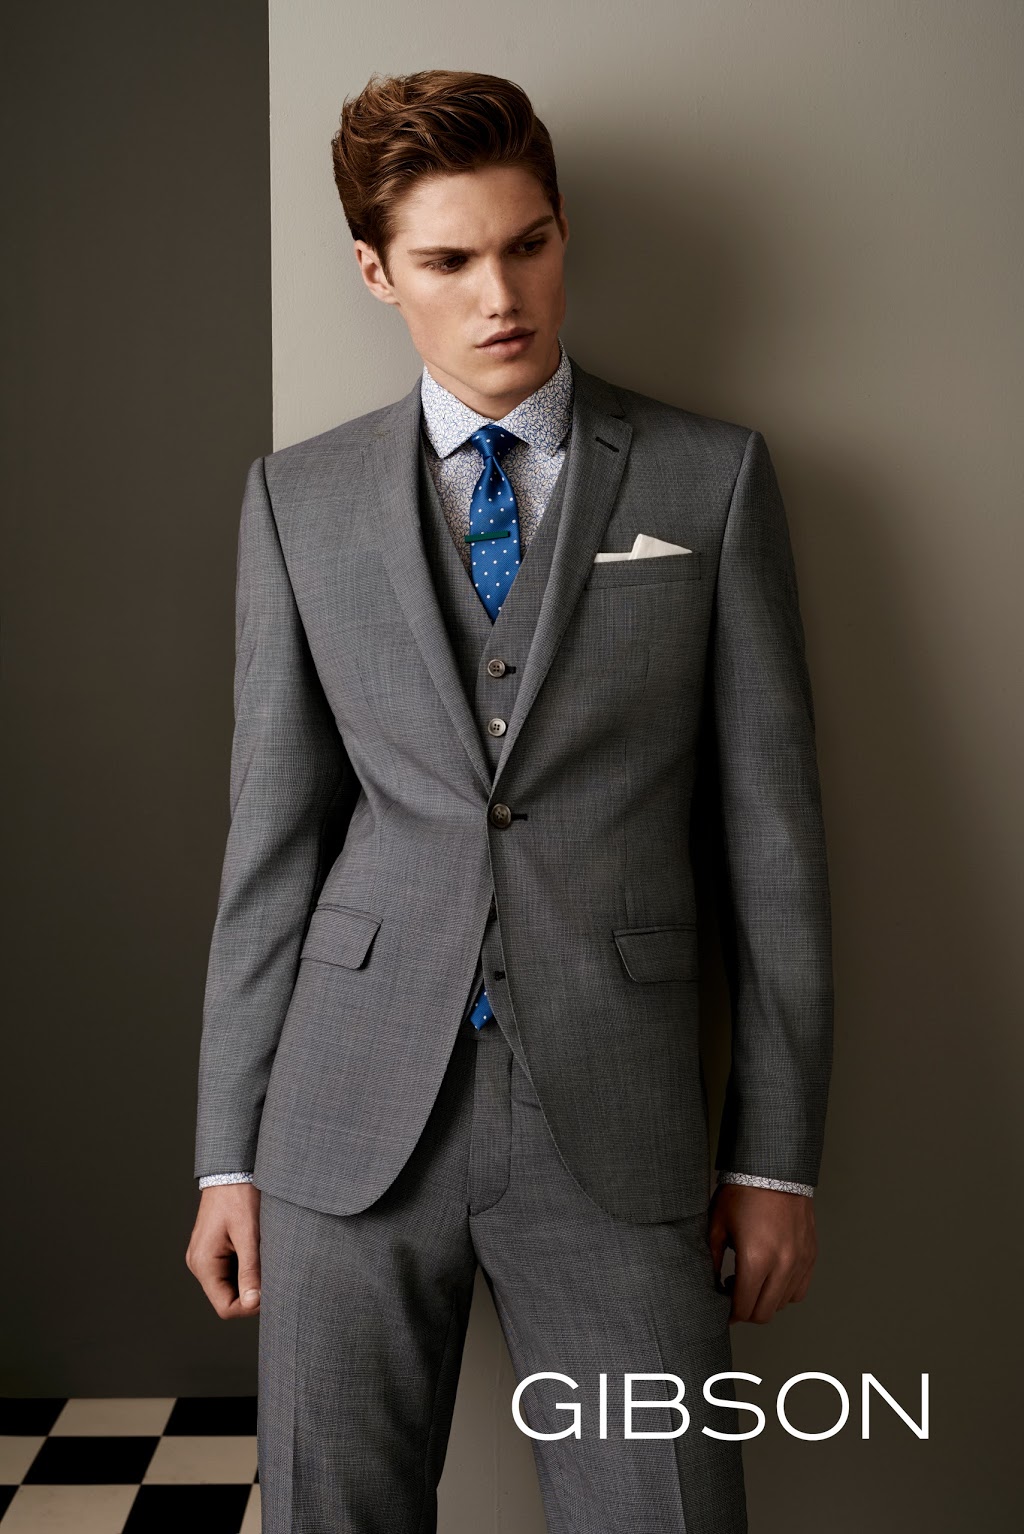 Mens Suit Warehouse | clothing store | 431 Victoria St, Abbotsford VIC 3067, Australia | 0394284151 OR +61 3 9428 4151